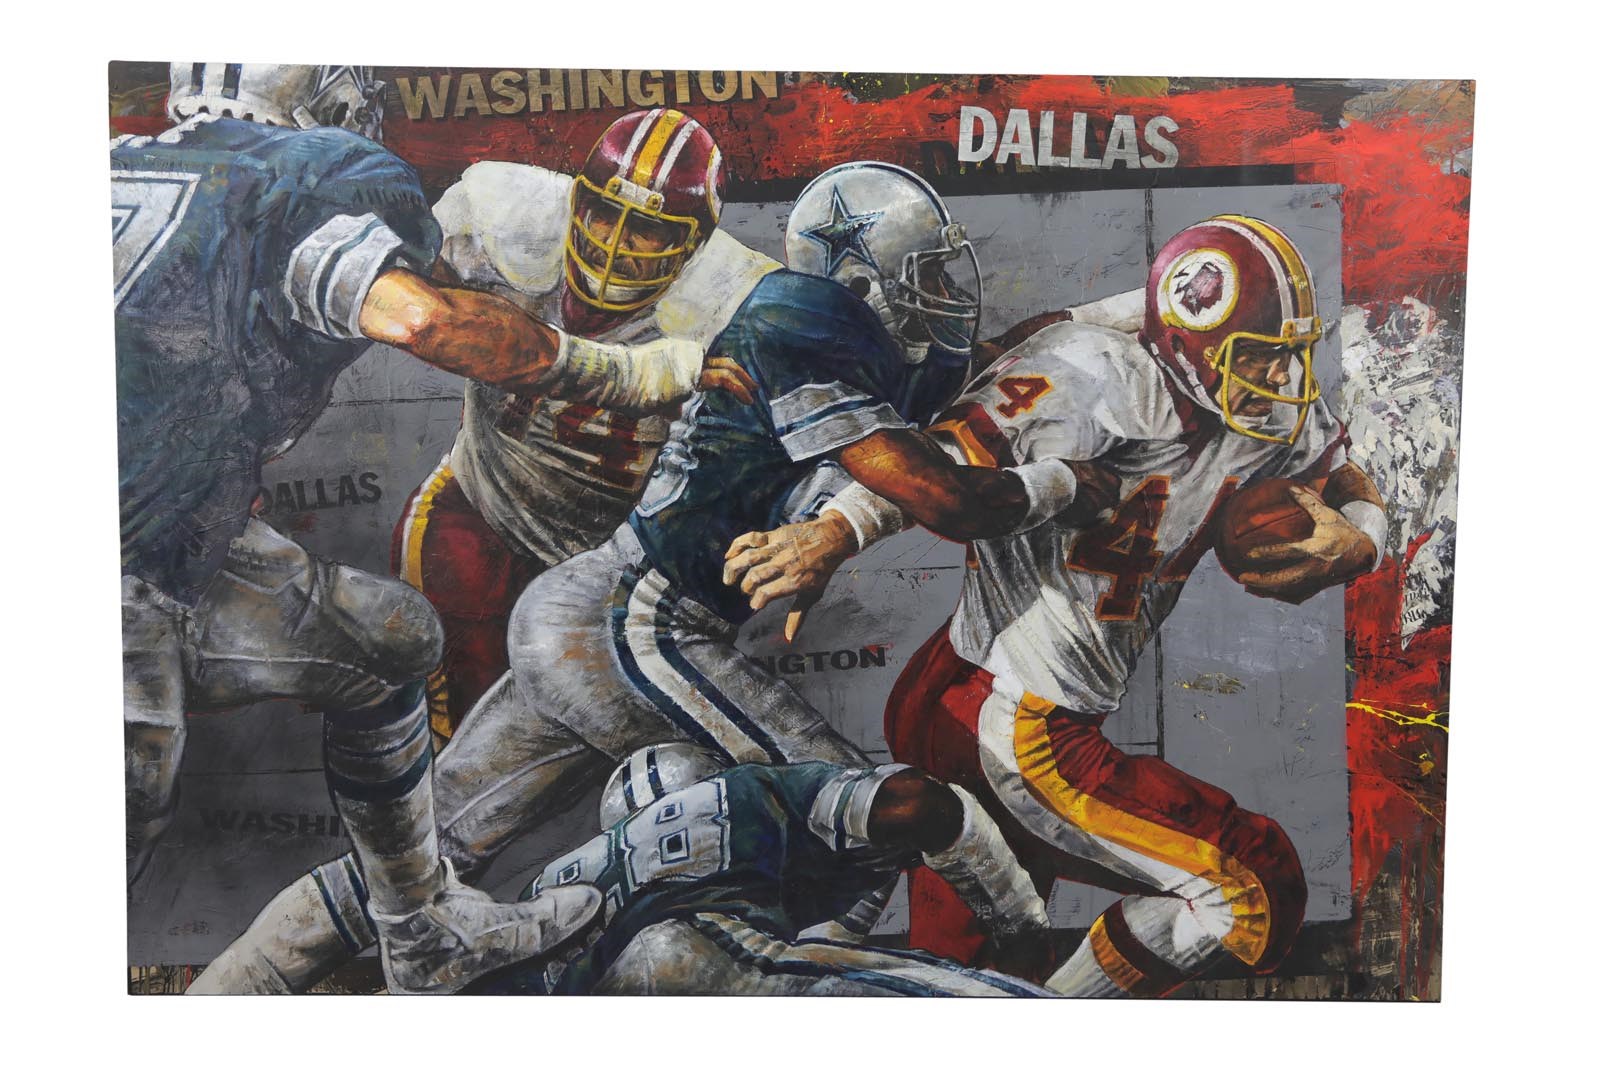 John Riggins "The Rivalry" Oil on Board Original Painting by Stephen Holland